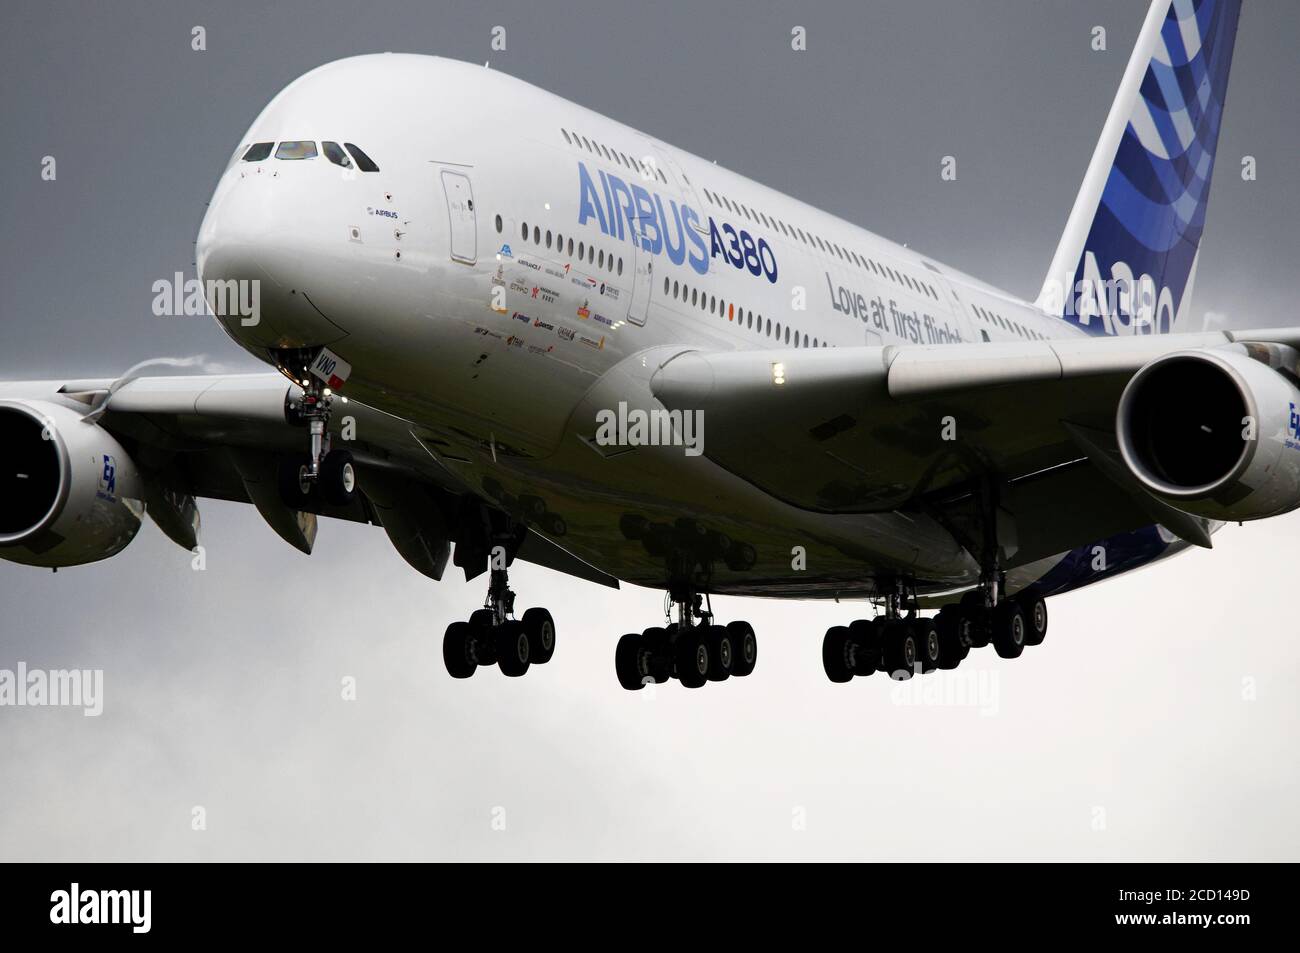 Airbus A380 approaching airport for landing Stock Photo